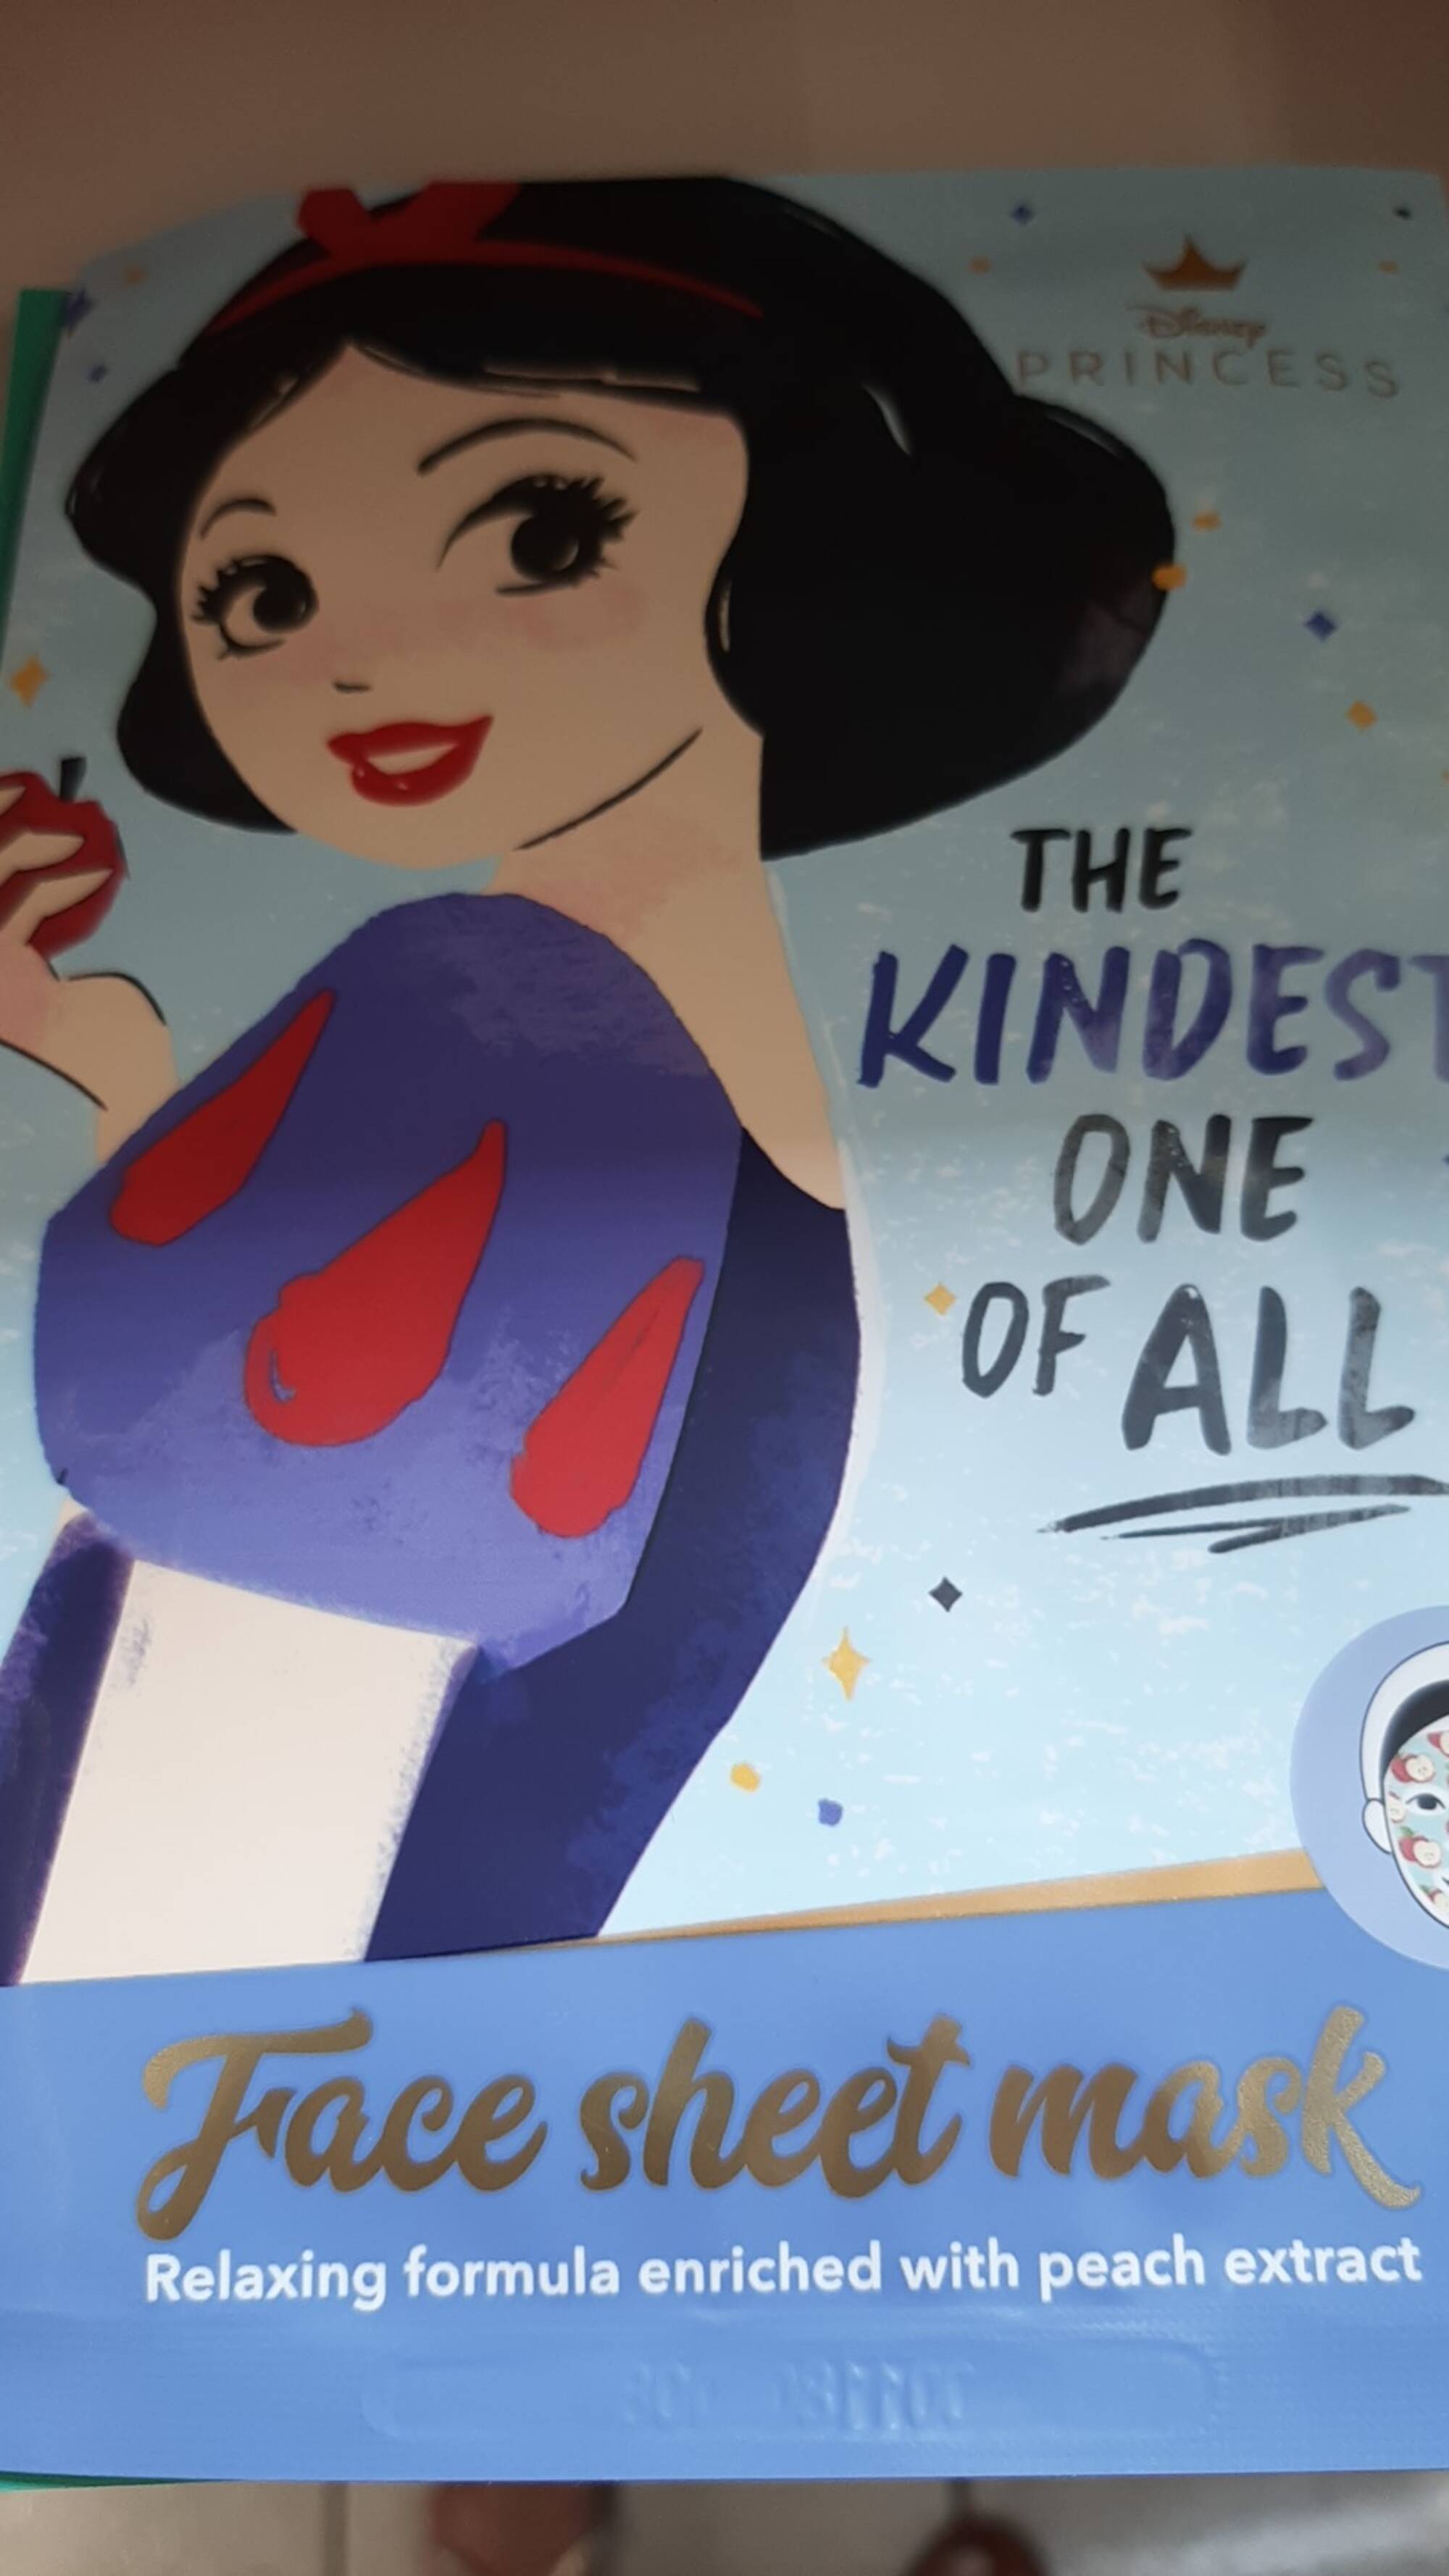 DISNEY - The kindest one of all - Face sheet mask